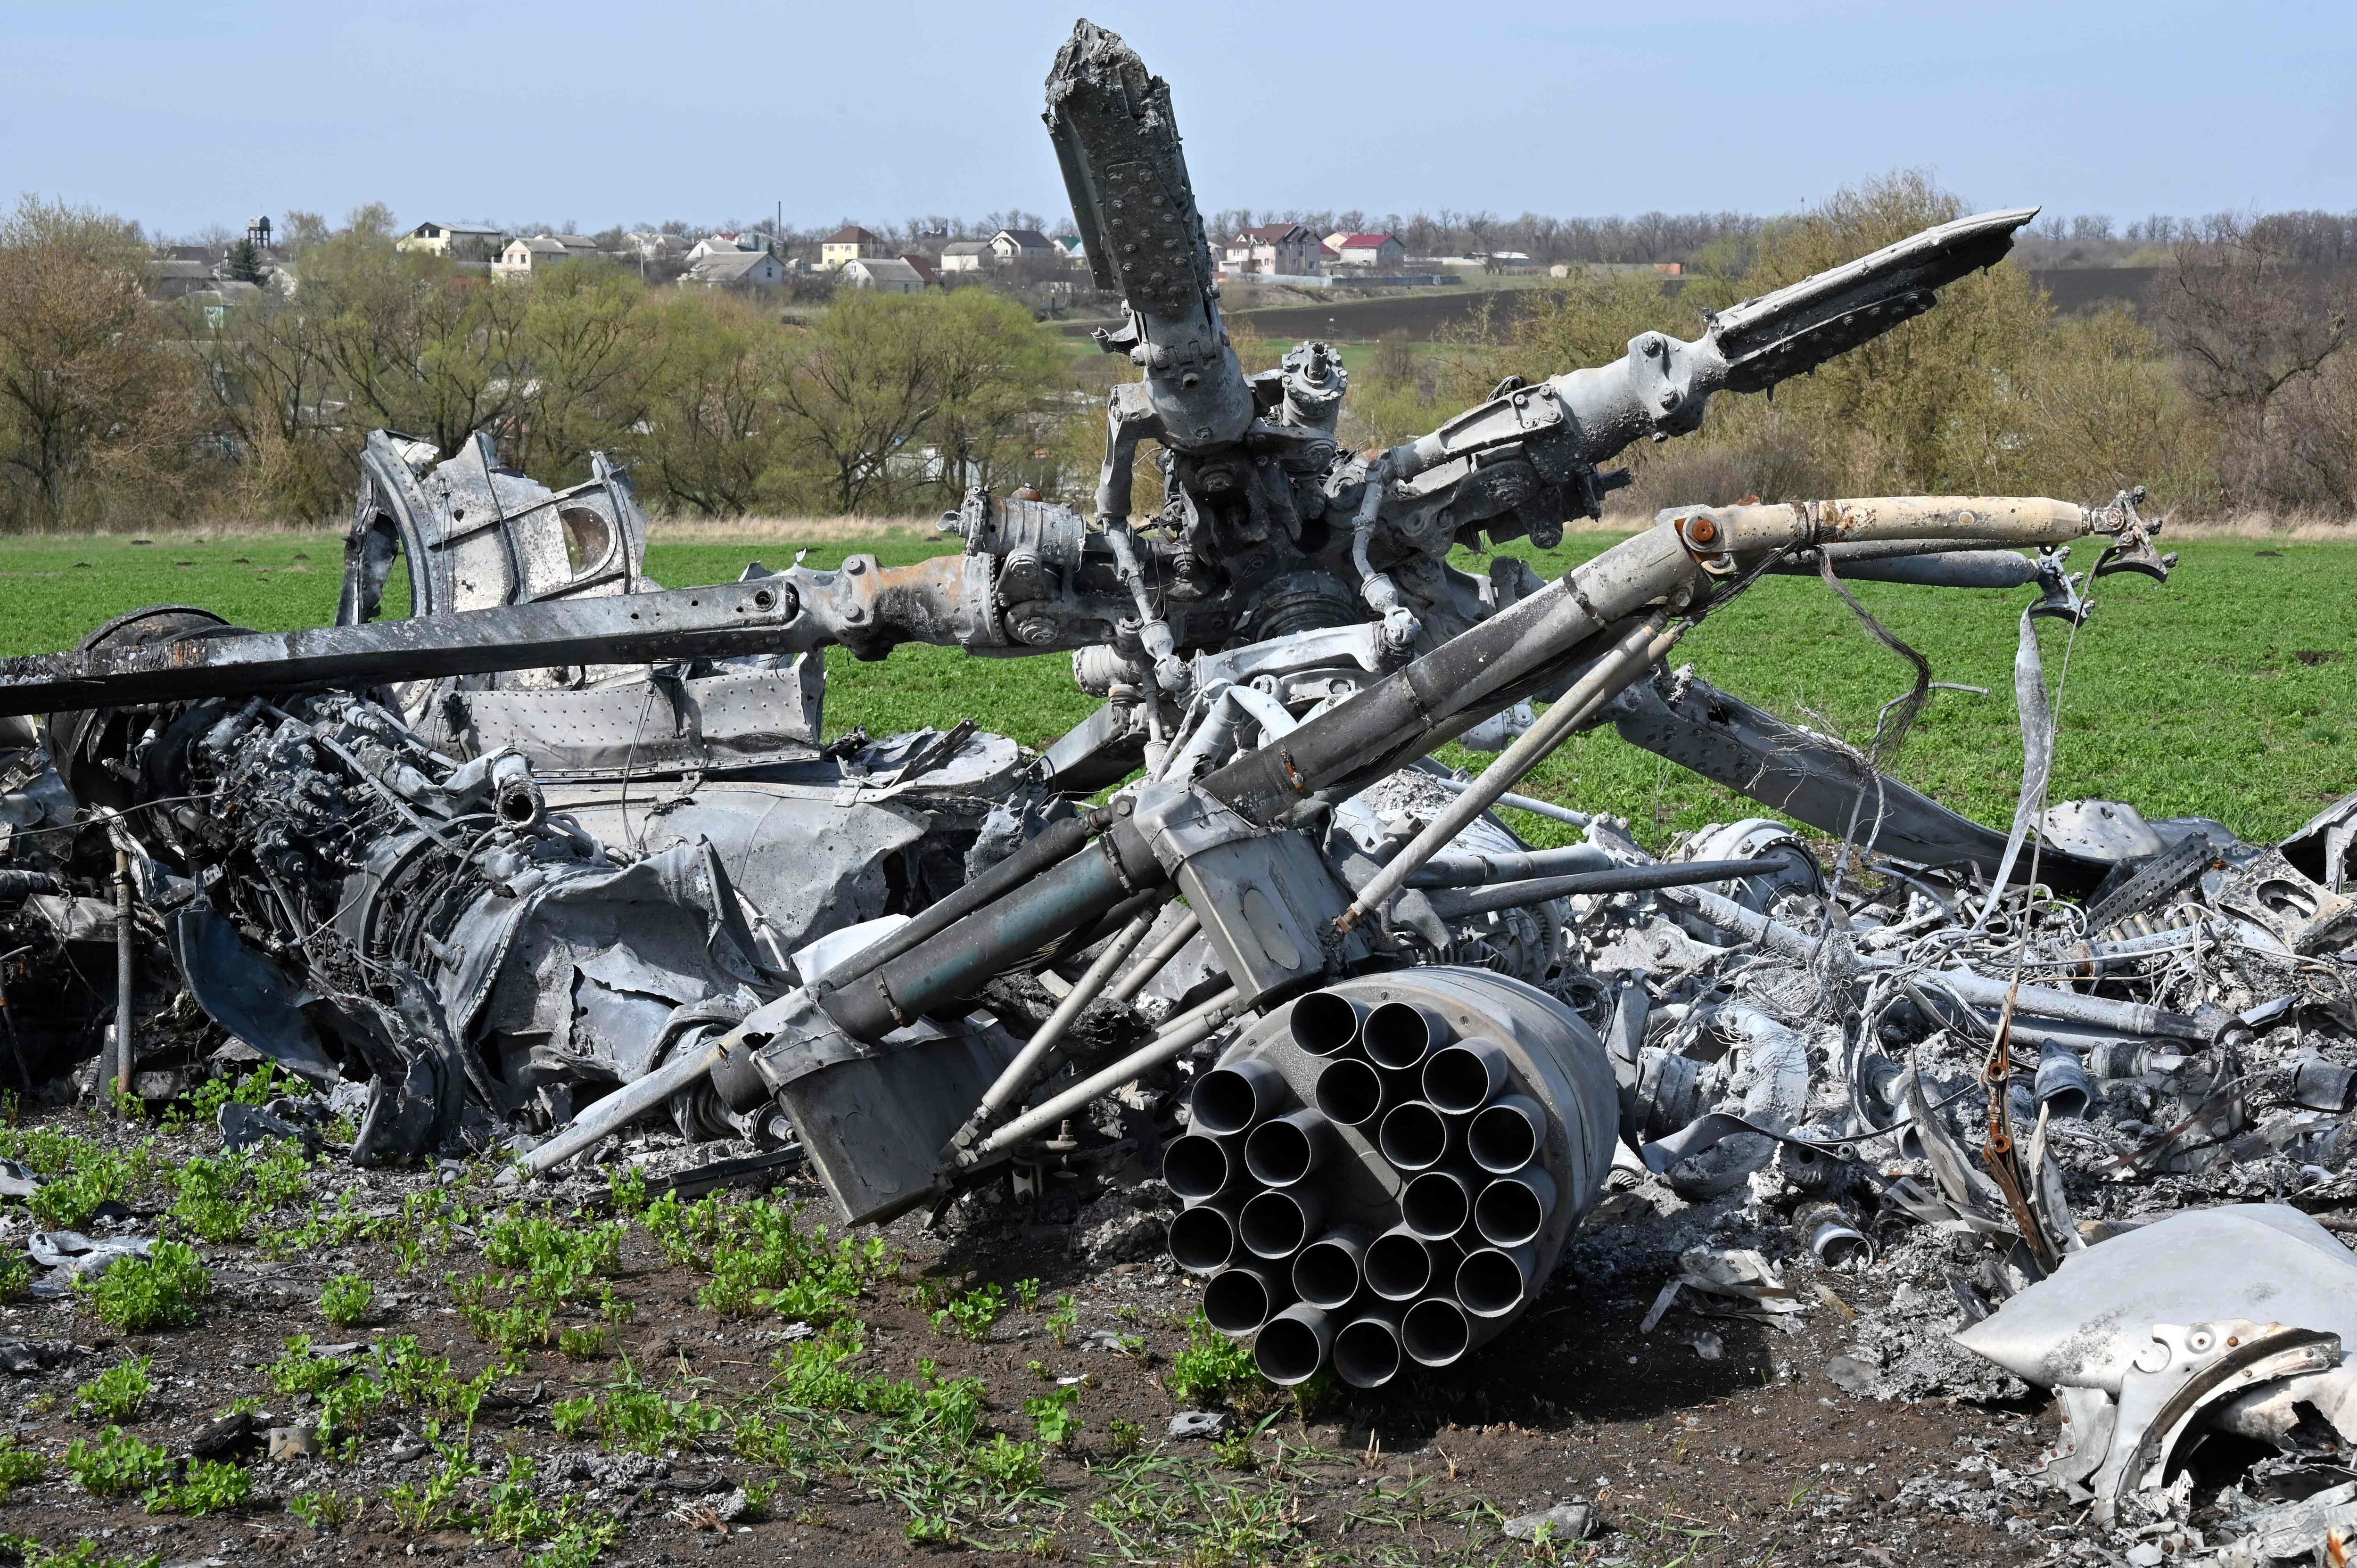 The wreckage of a downed Russian helicopter lies in a field near Kharkiv on April 16, 2022, amid the Russian invasion of Ukraine. - Russia has stepped up air strikes on Kyiv, hitting another military factory a day after Moscow warned it would renew attacks following two weeks of relative calm in the Ukrainian capital. (Photo by SERGEY BOBOK / AFP)